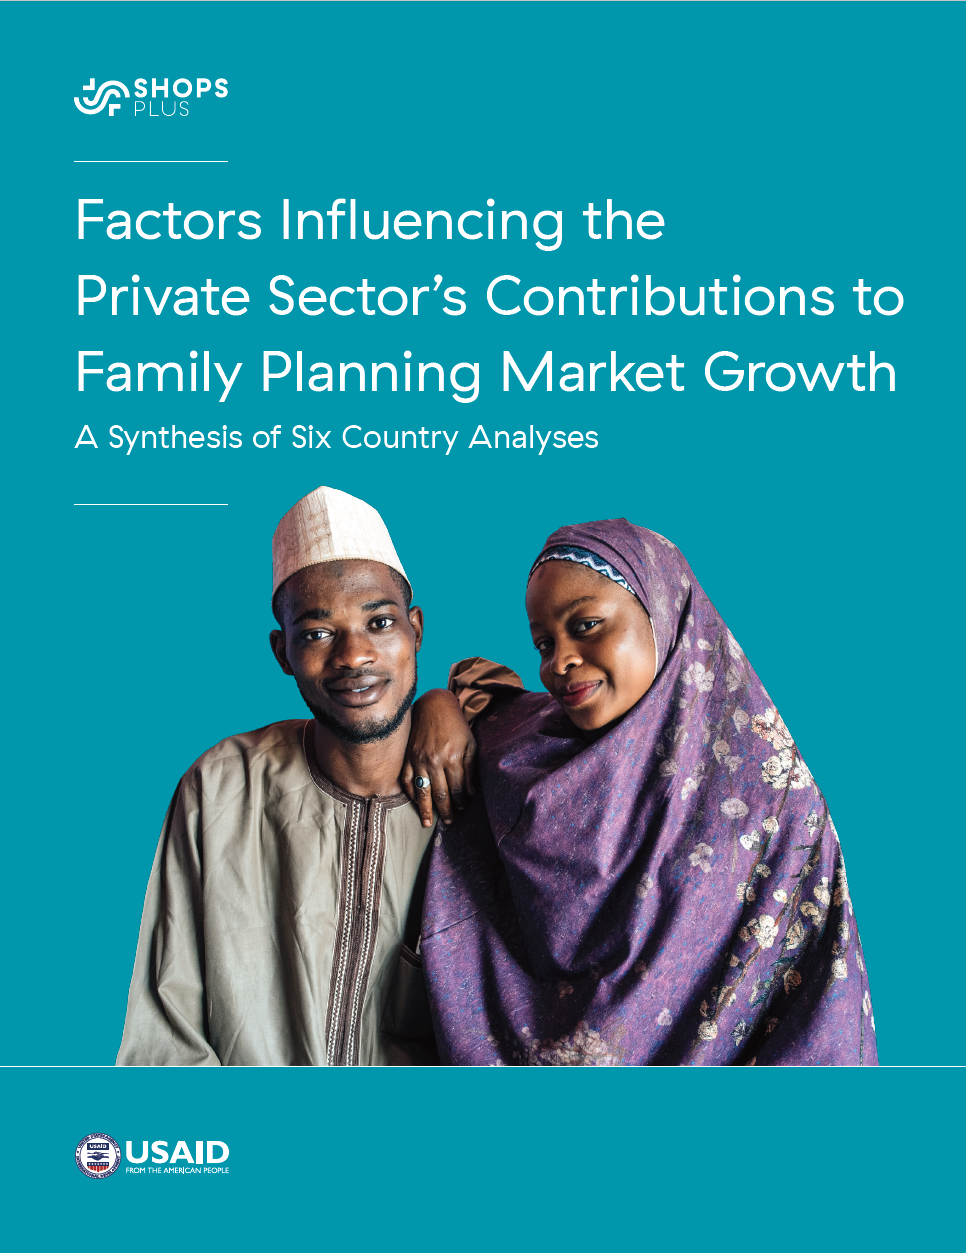 Cover for the brief on Factors Influencing the Private Sector's Contributions to Family Planning Market Growth: A Synthesis of Six Country Analyses